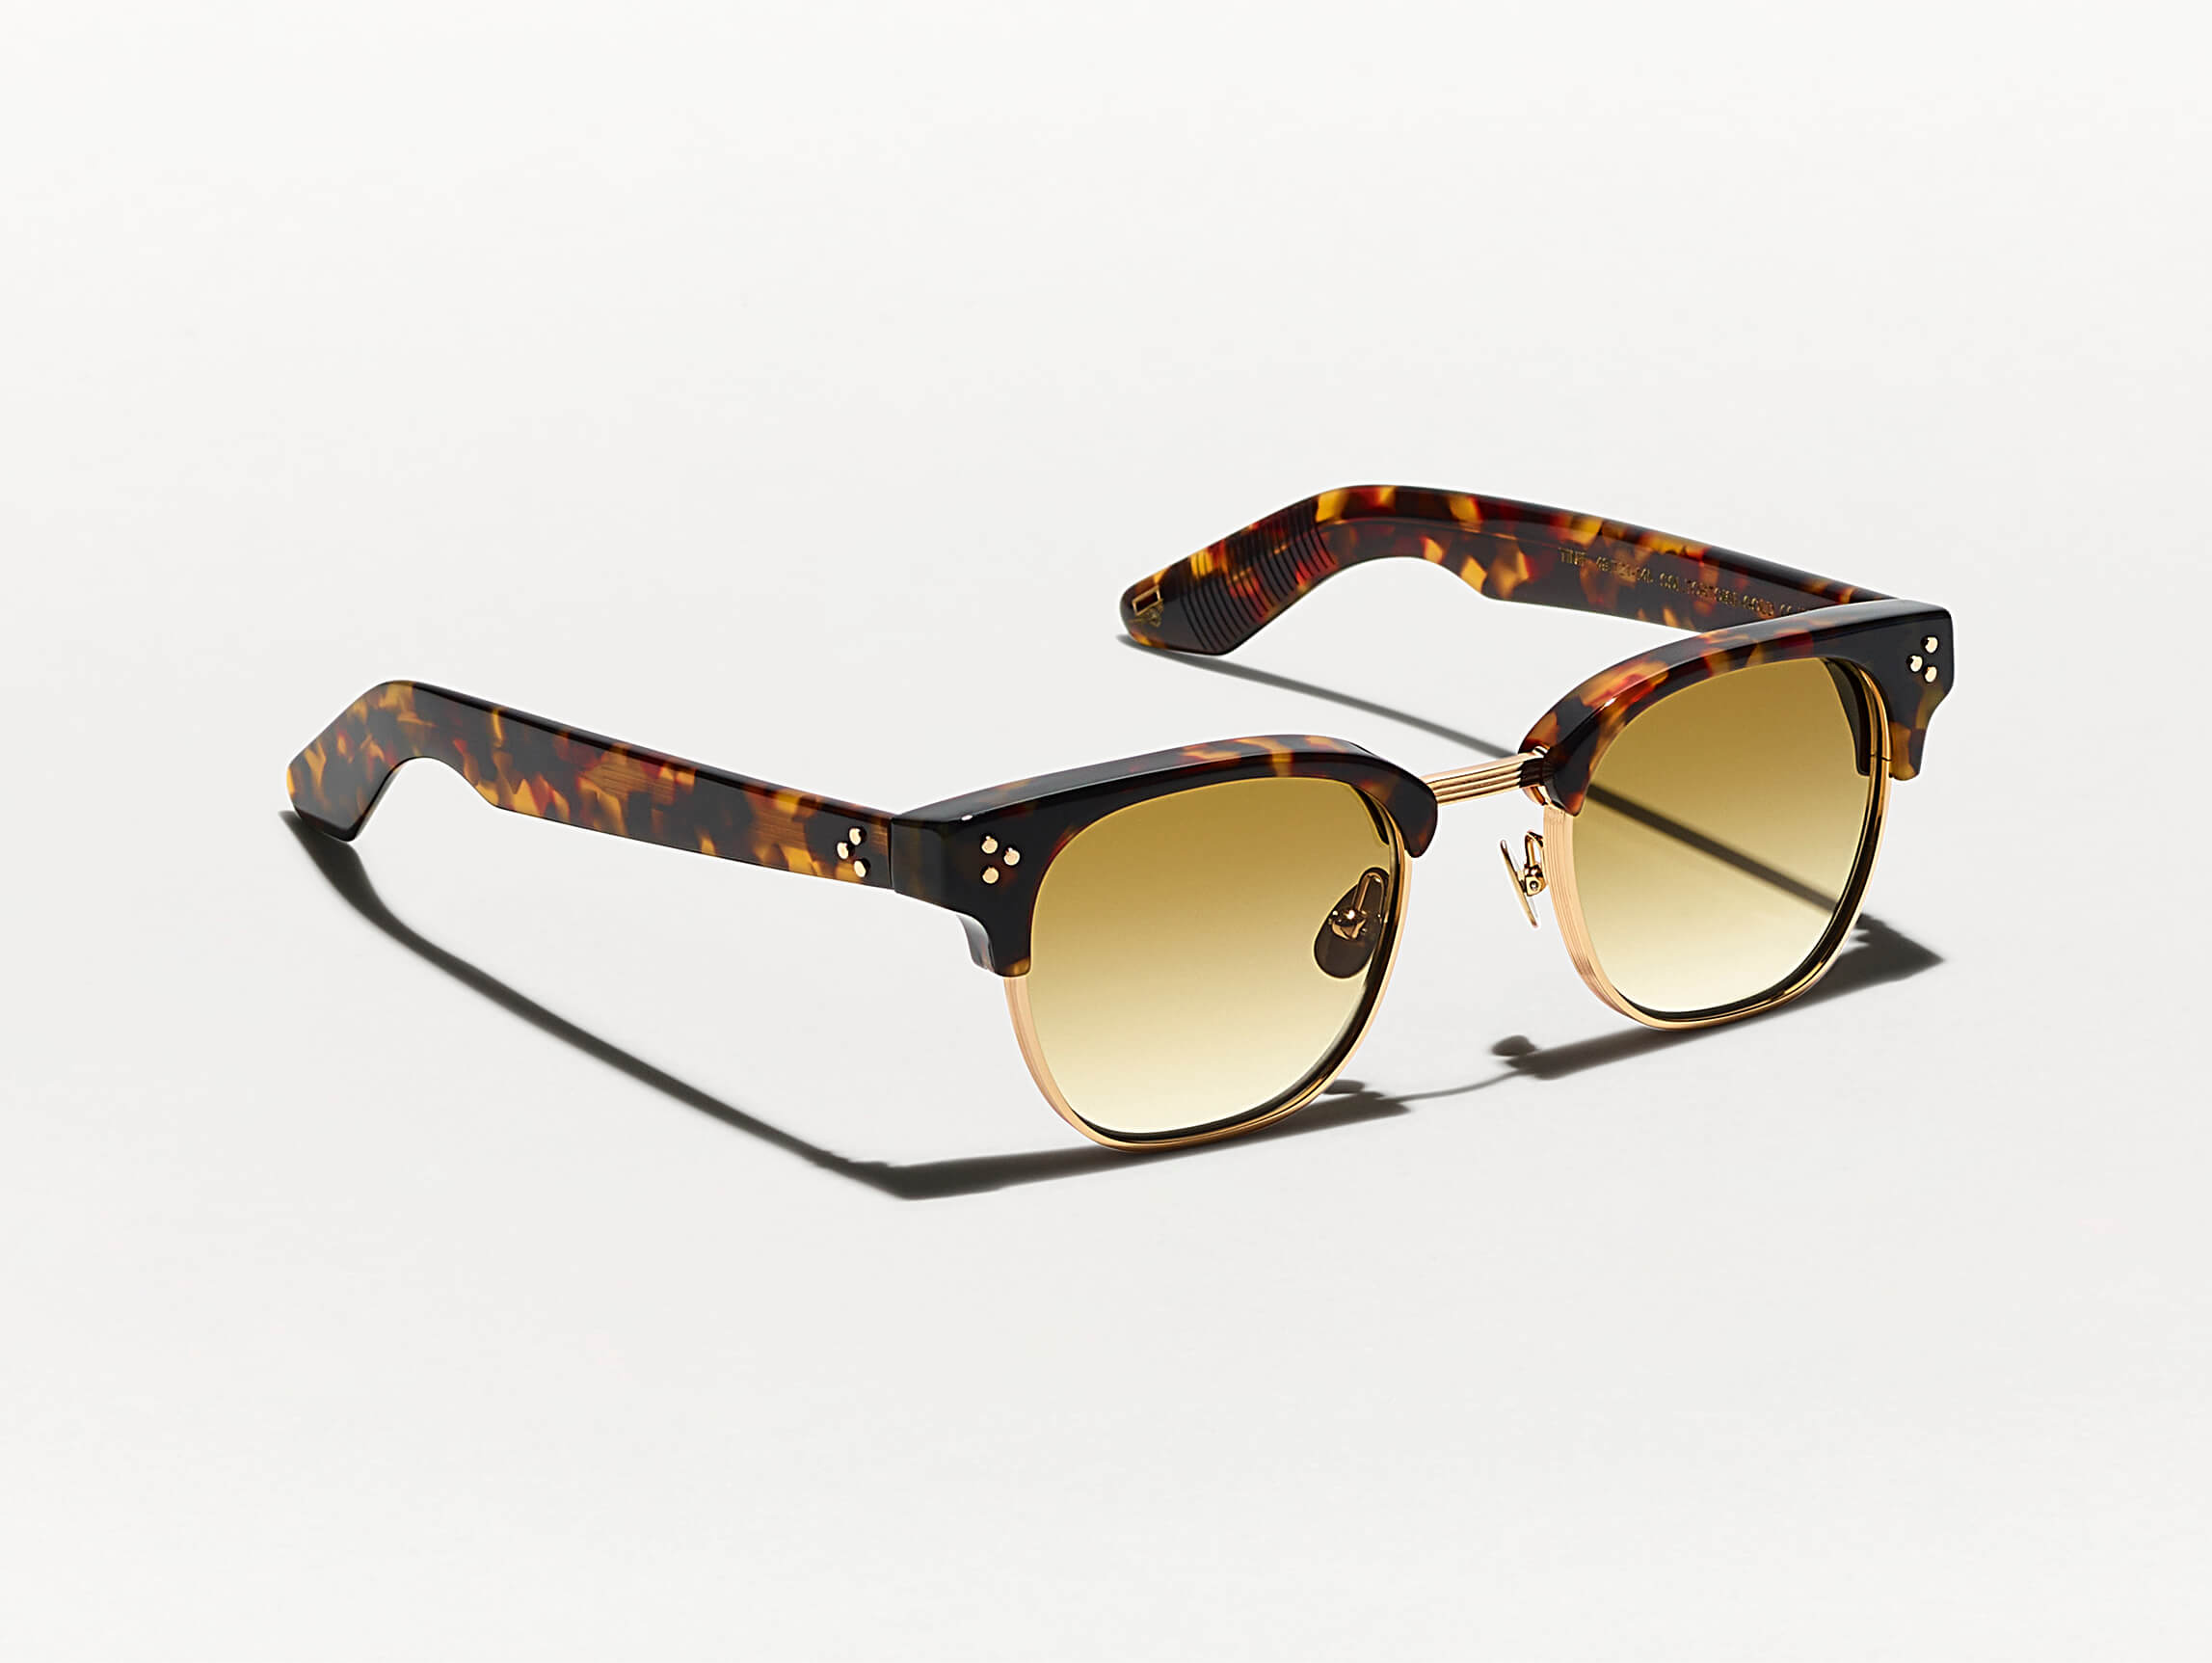 The TINIF SUN in Tortoise/Gold with Chestnut Fade Tinted Lenses